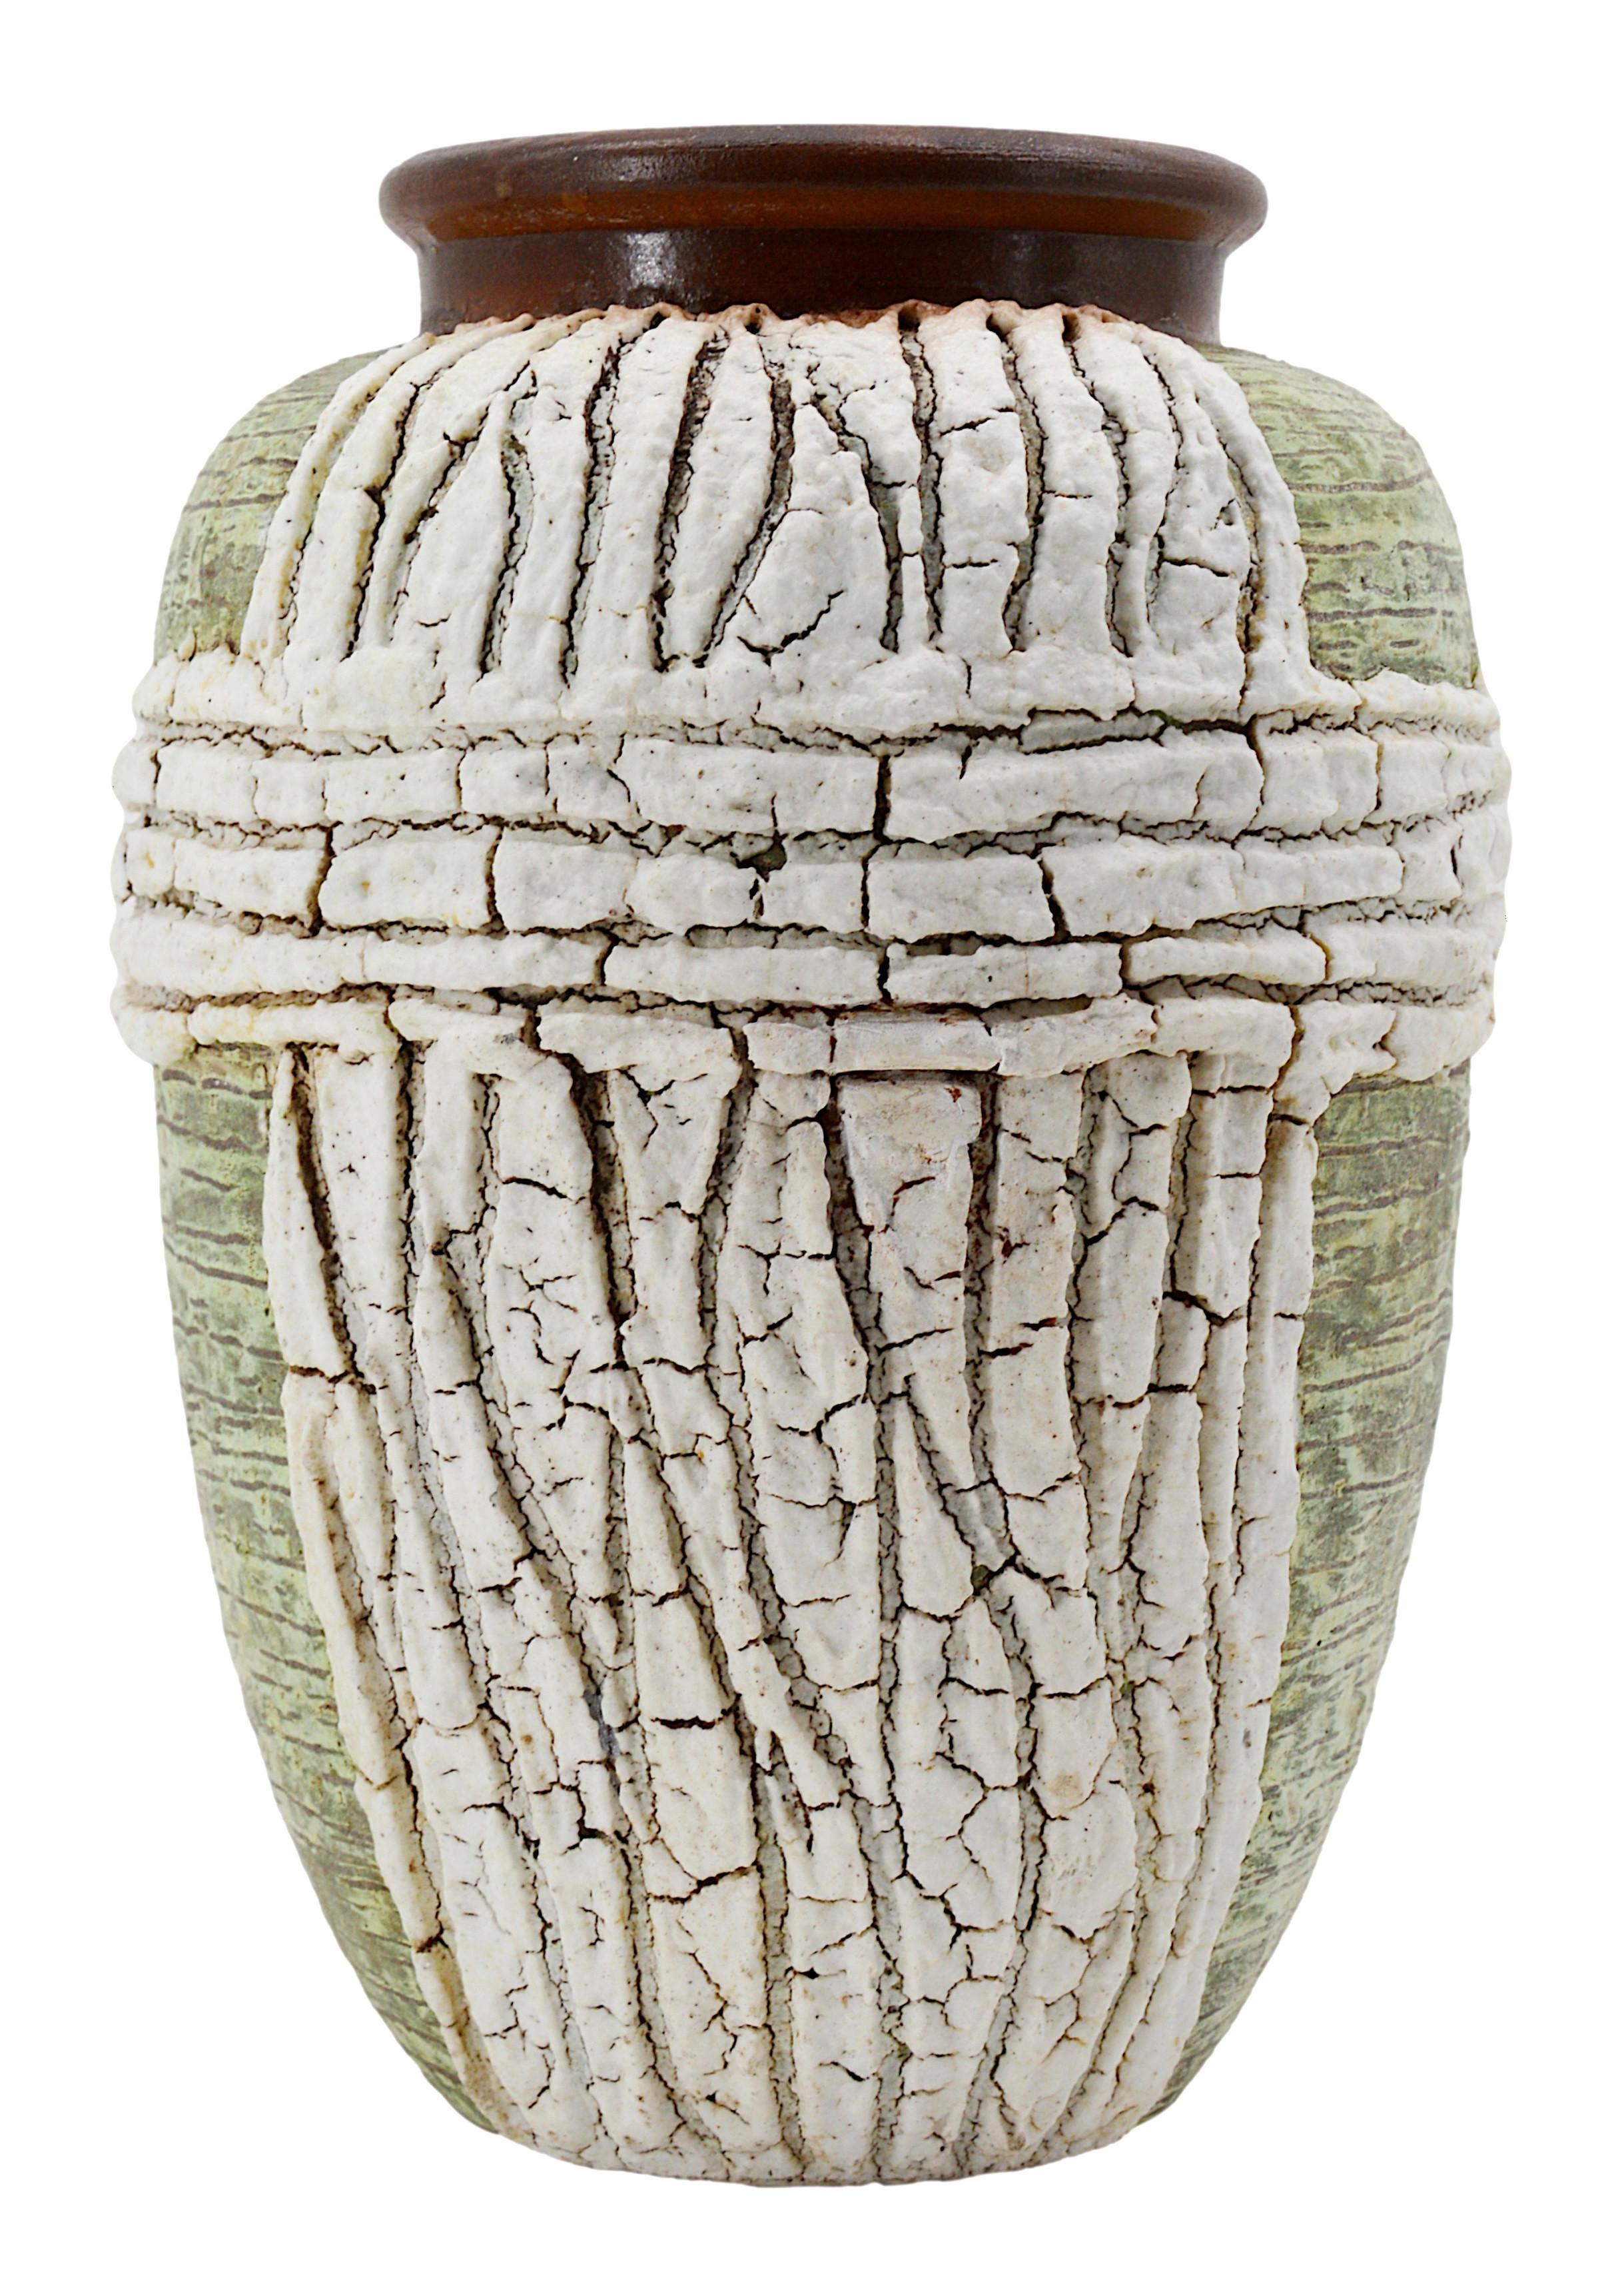 French Art Deco vase by Louis Dage (Antony, Paris), France, ca.1930. Stoneware. Important enamel applications for this Africanist vase. Measures: Height: 11.4